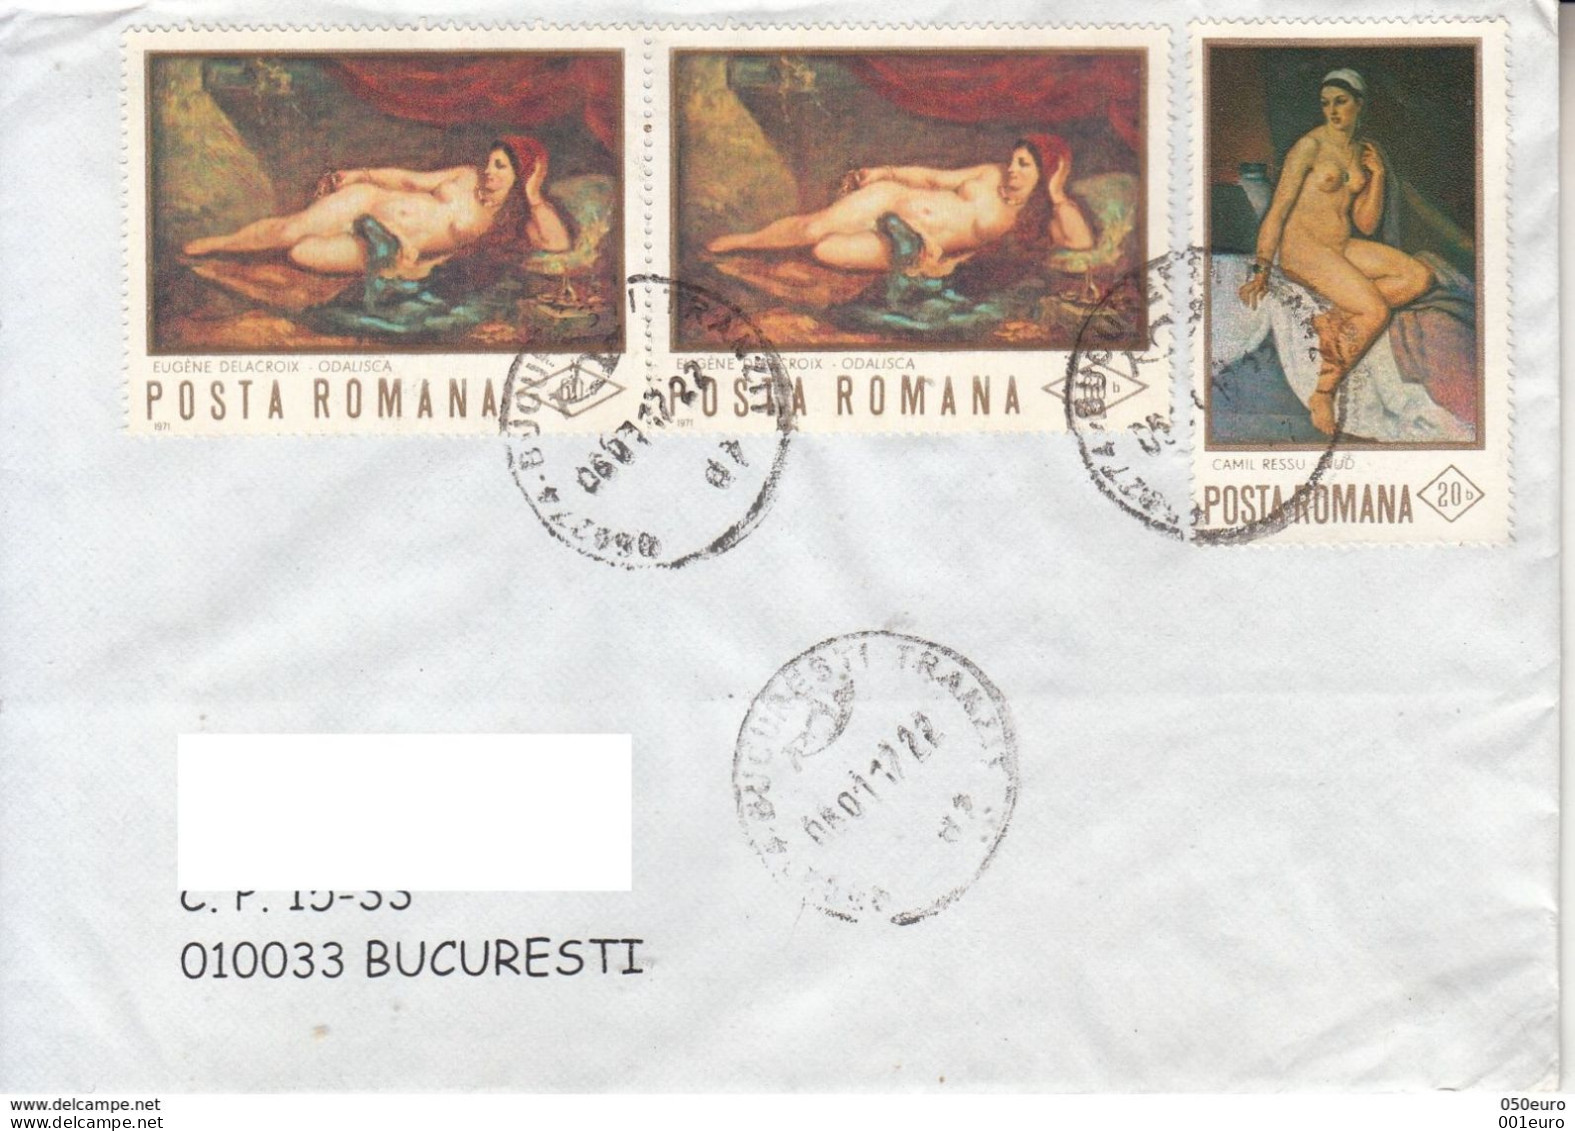 # ROMANIA : Lot Of 4 Covers Circulated As Domestic Letters In Romania #1043364880 - Registered Shipping! - Lettres & Documents